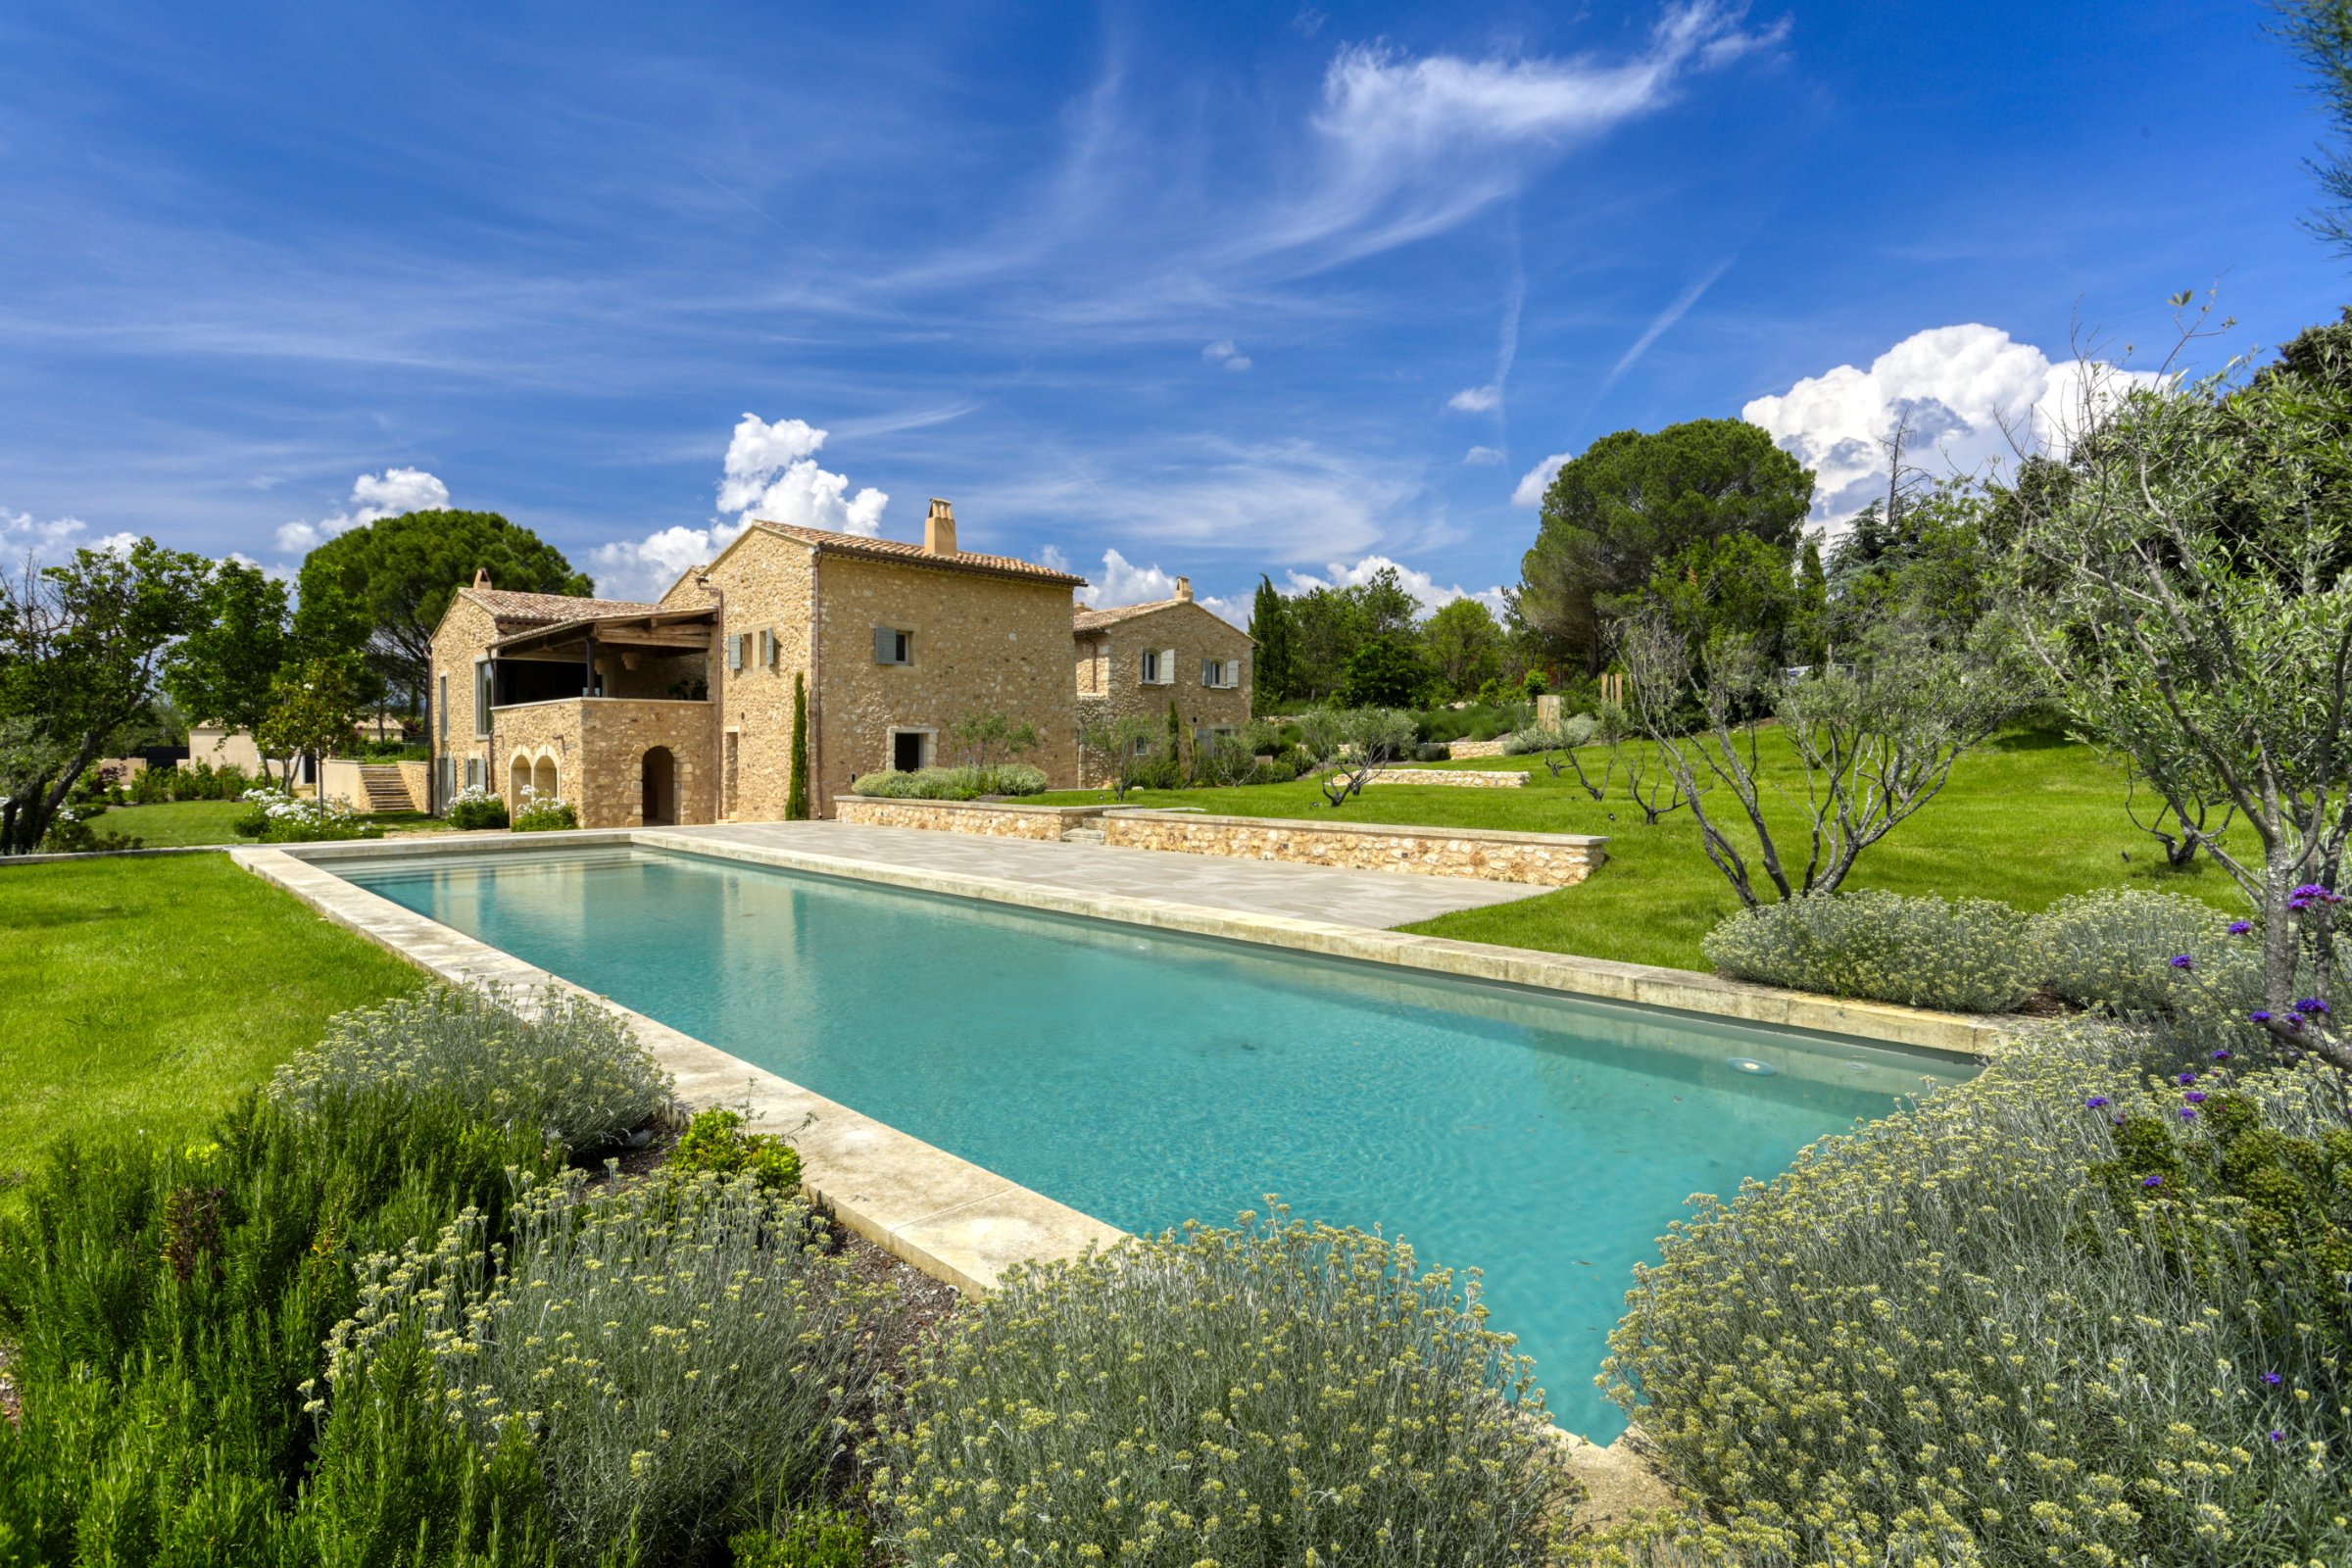 Francis+York+ Exquisitely Renovated Provencal Mas in Bonnieux, Luberon 00003.jpg